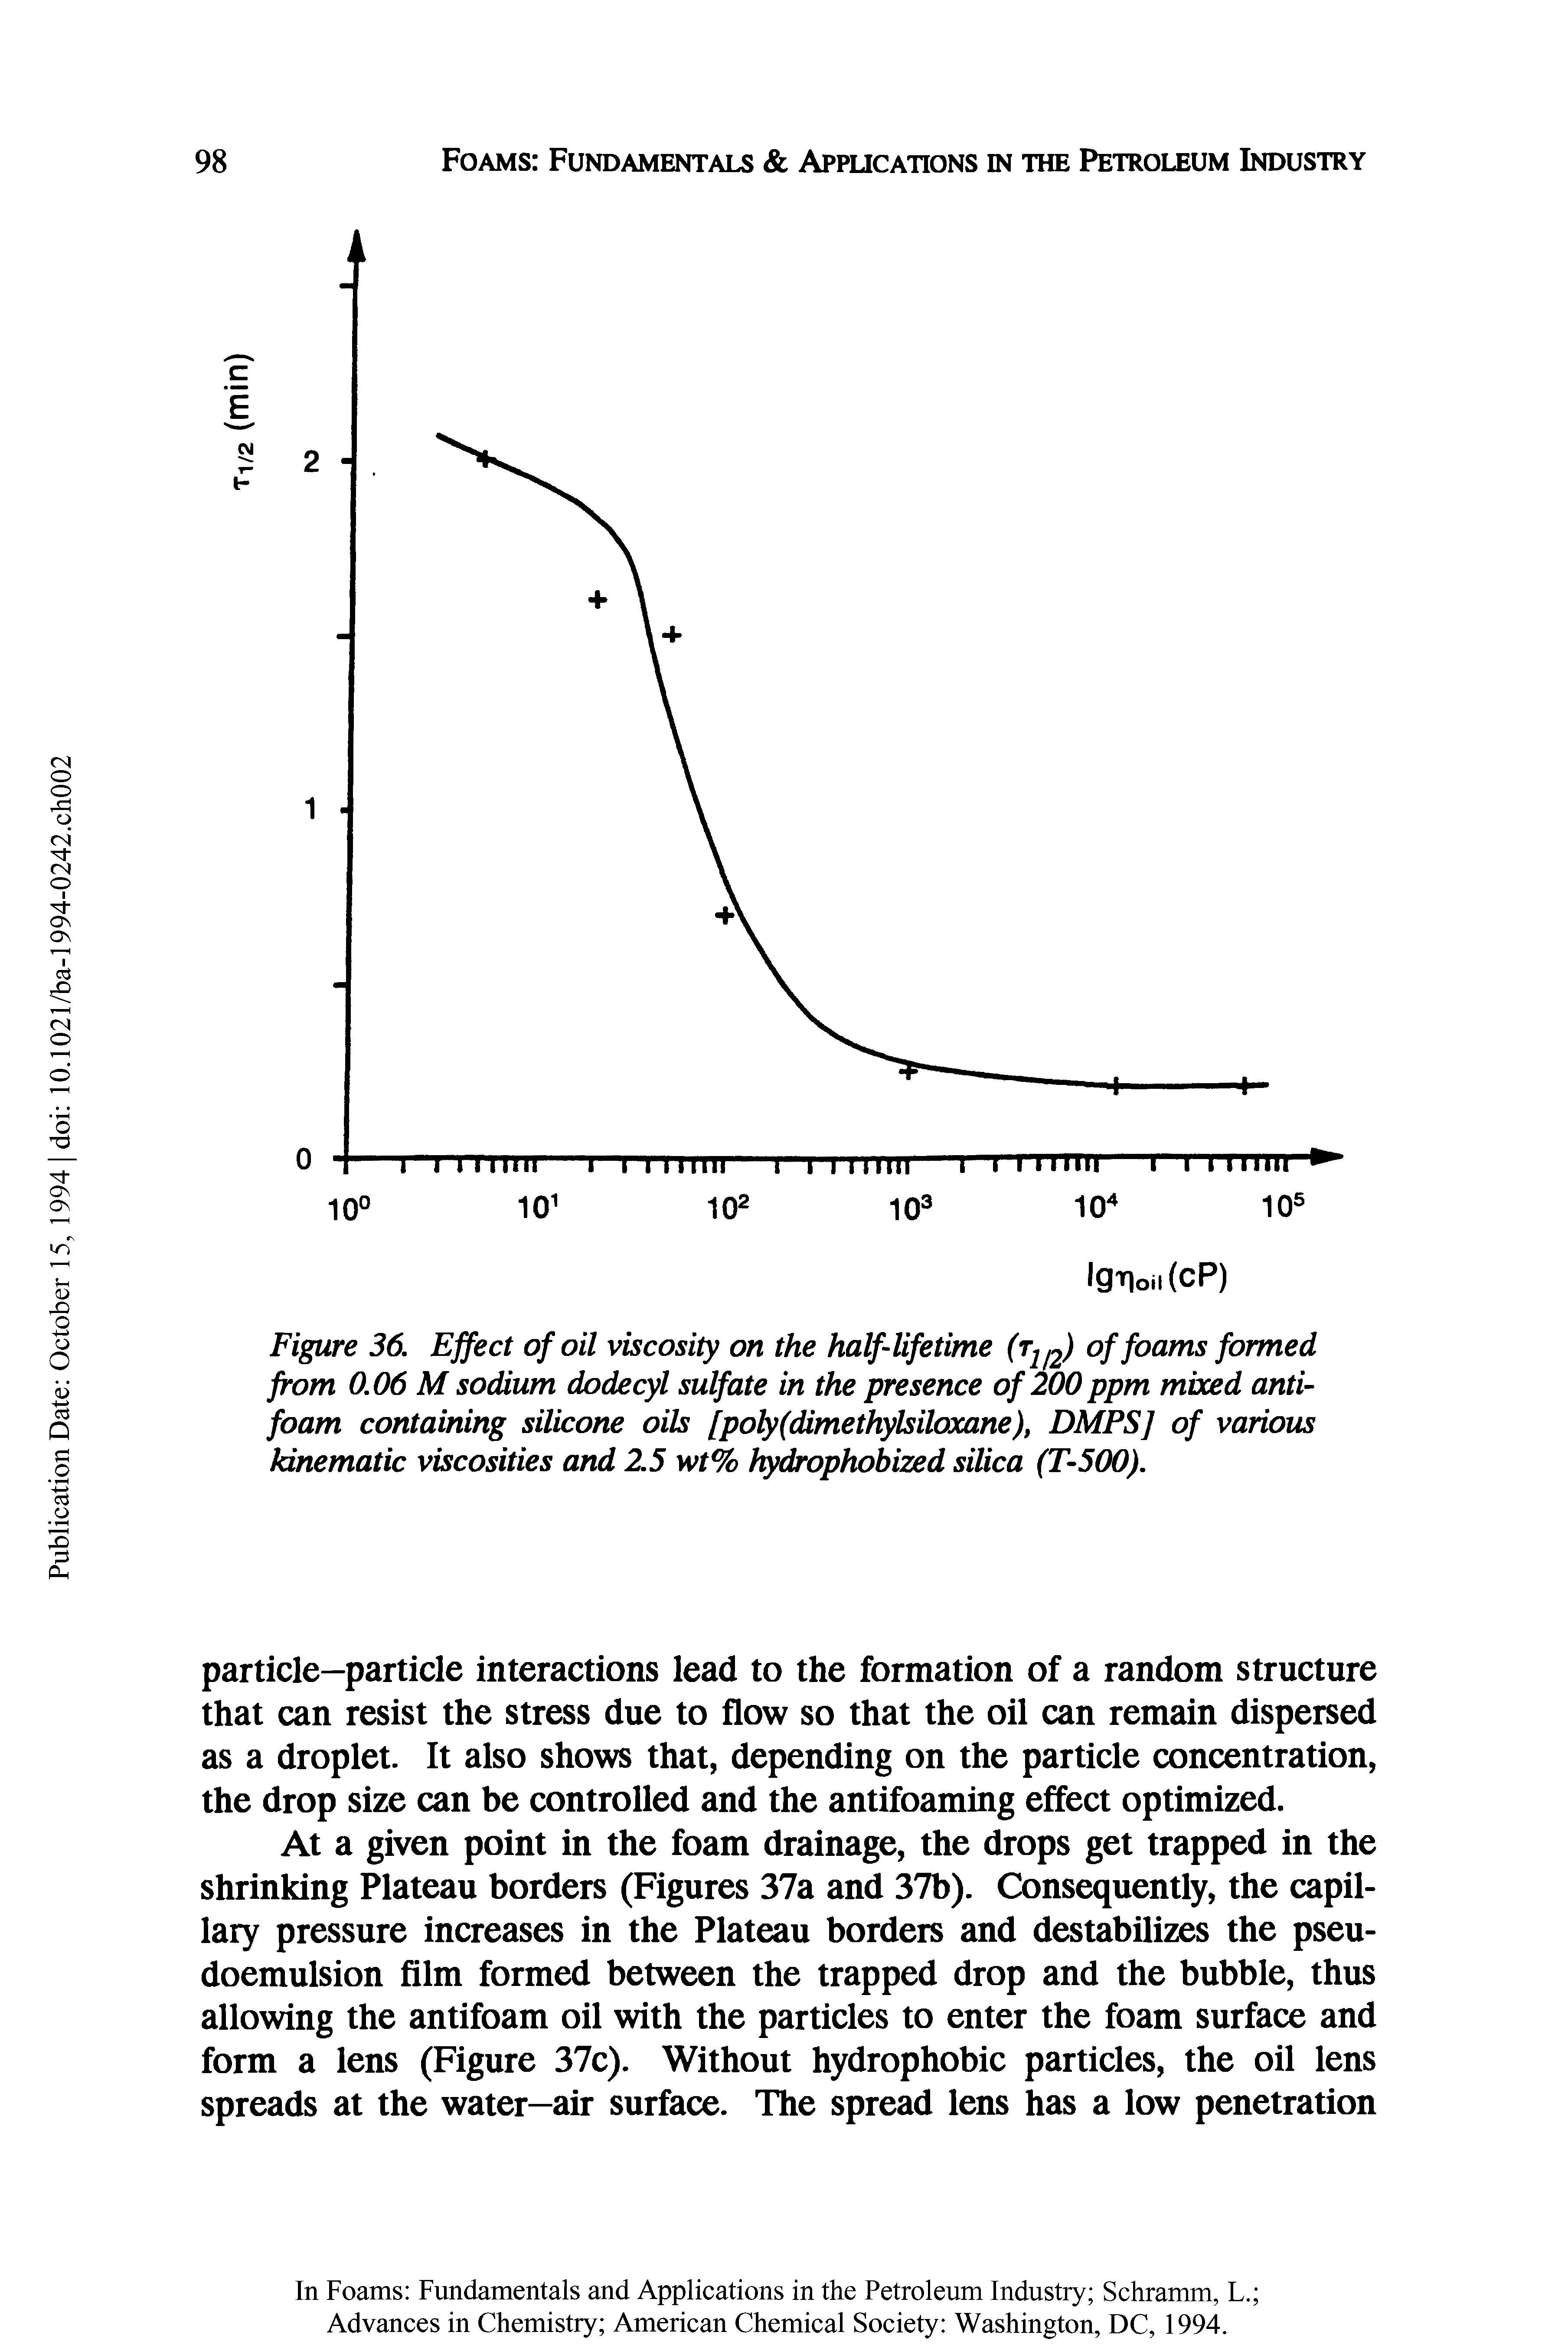 Figure 36. Effect of oil viscosity on the half-lifetime (r ) of foams formed from 0.06 M sodium dodecyl sulfate in the presence of 200ppm mixed antifoam containing silicone oils [poly(dimethylsiloxane), DMPSJ of various kinematic viscosities and 2.5 wt% hydrophobized silica (T-500).